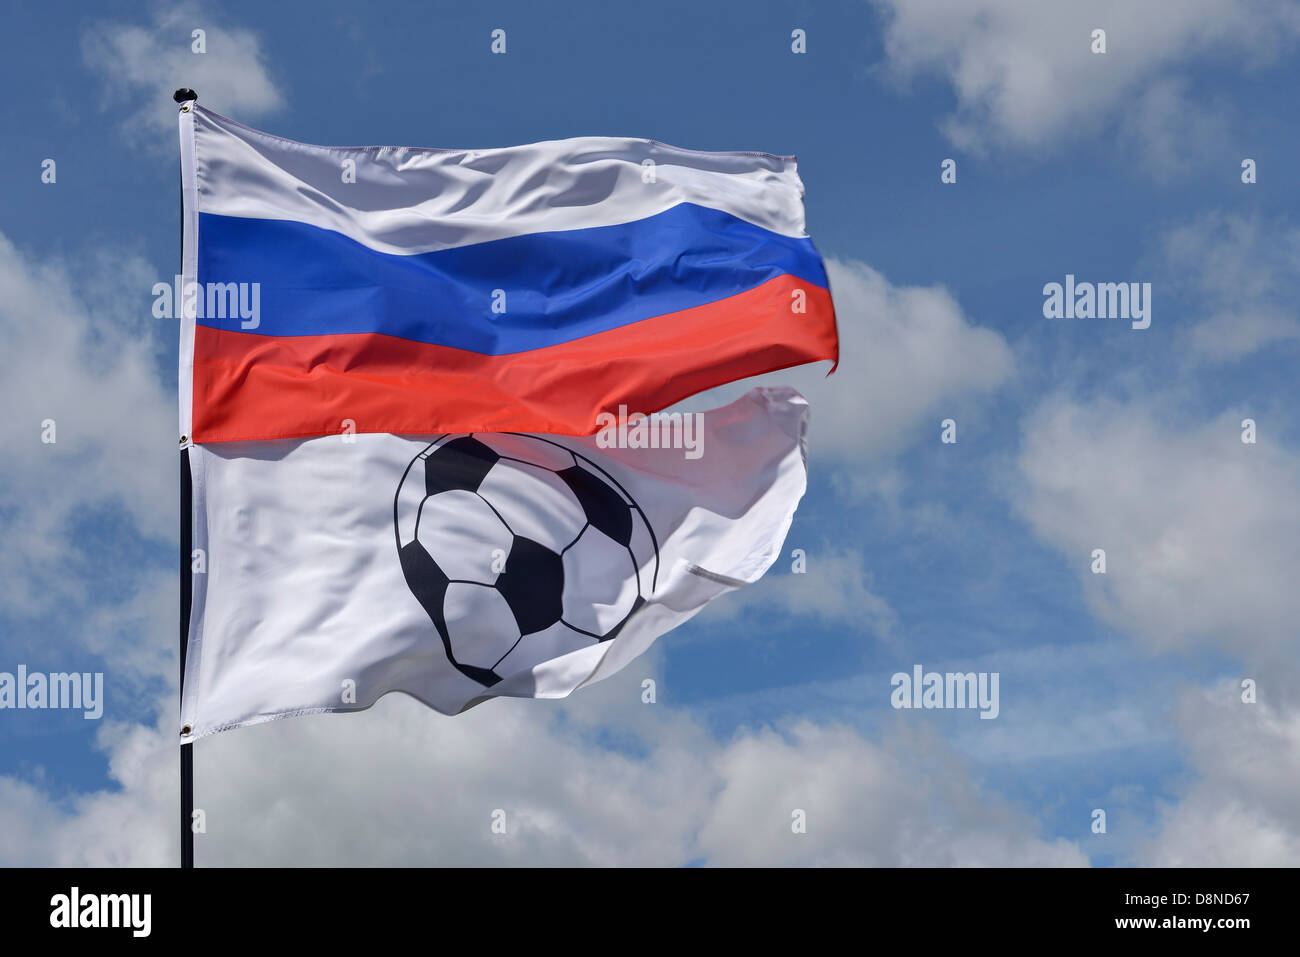 Russia national flag and football flag Stock Photo